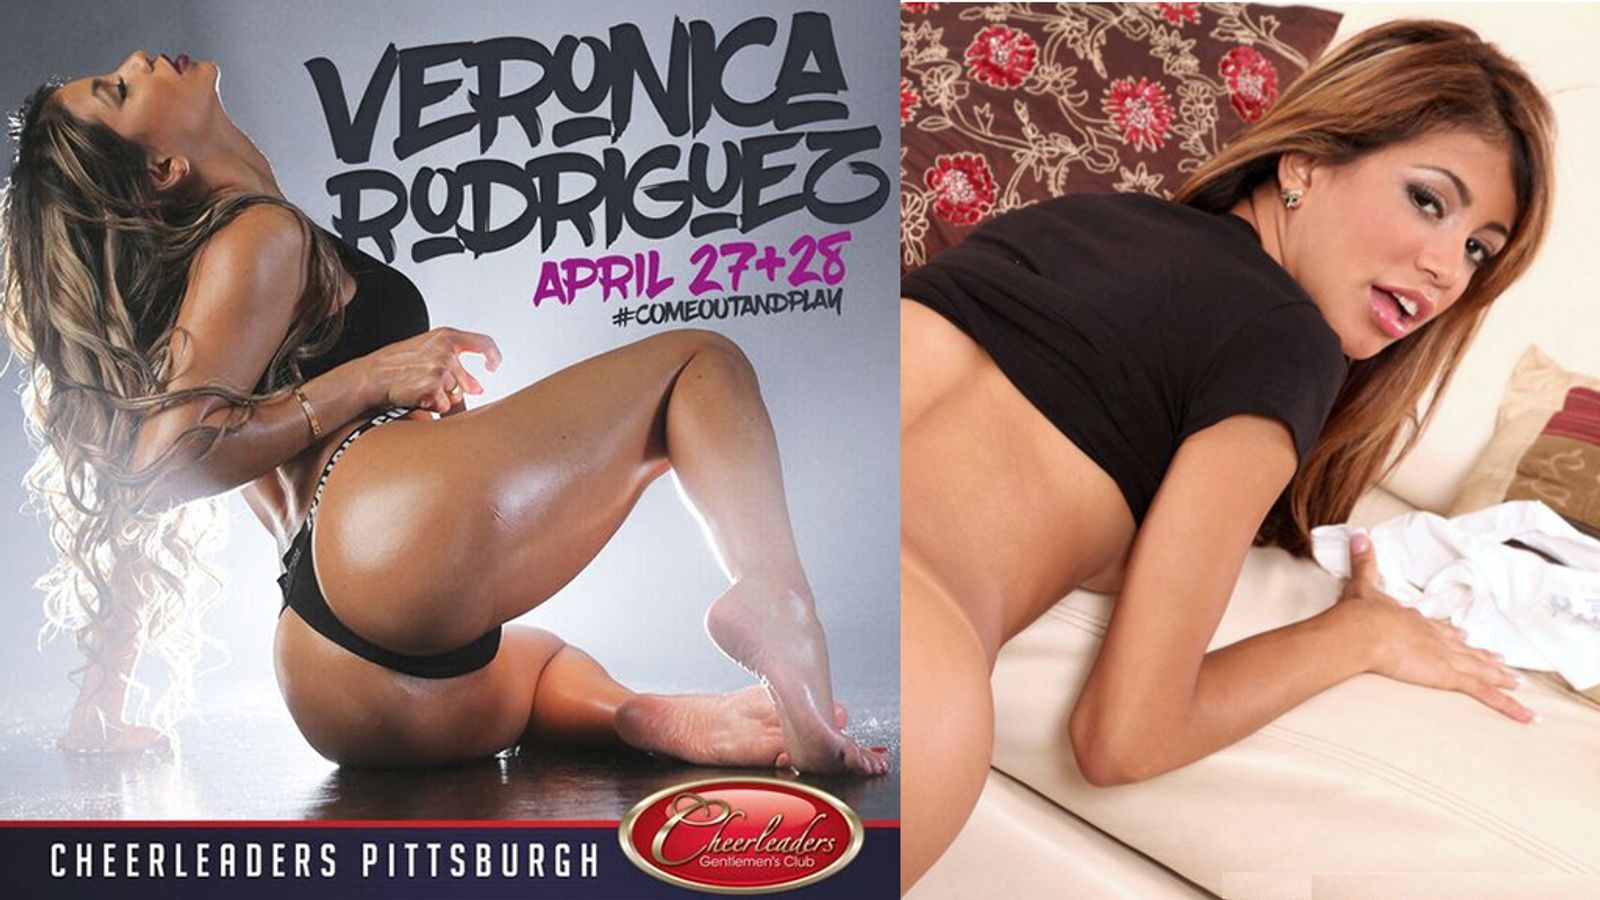 Fans Can See Veronica Rodriguez at Cheerleaders In Pittsburgh